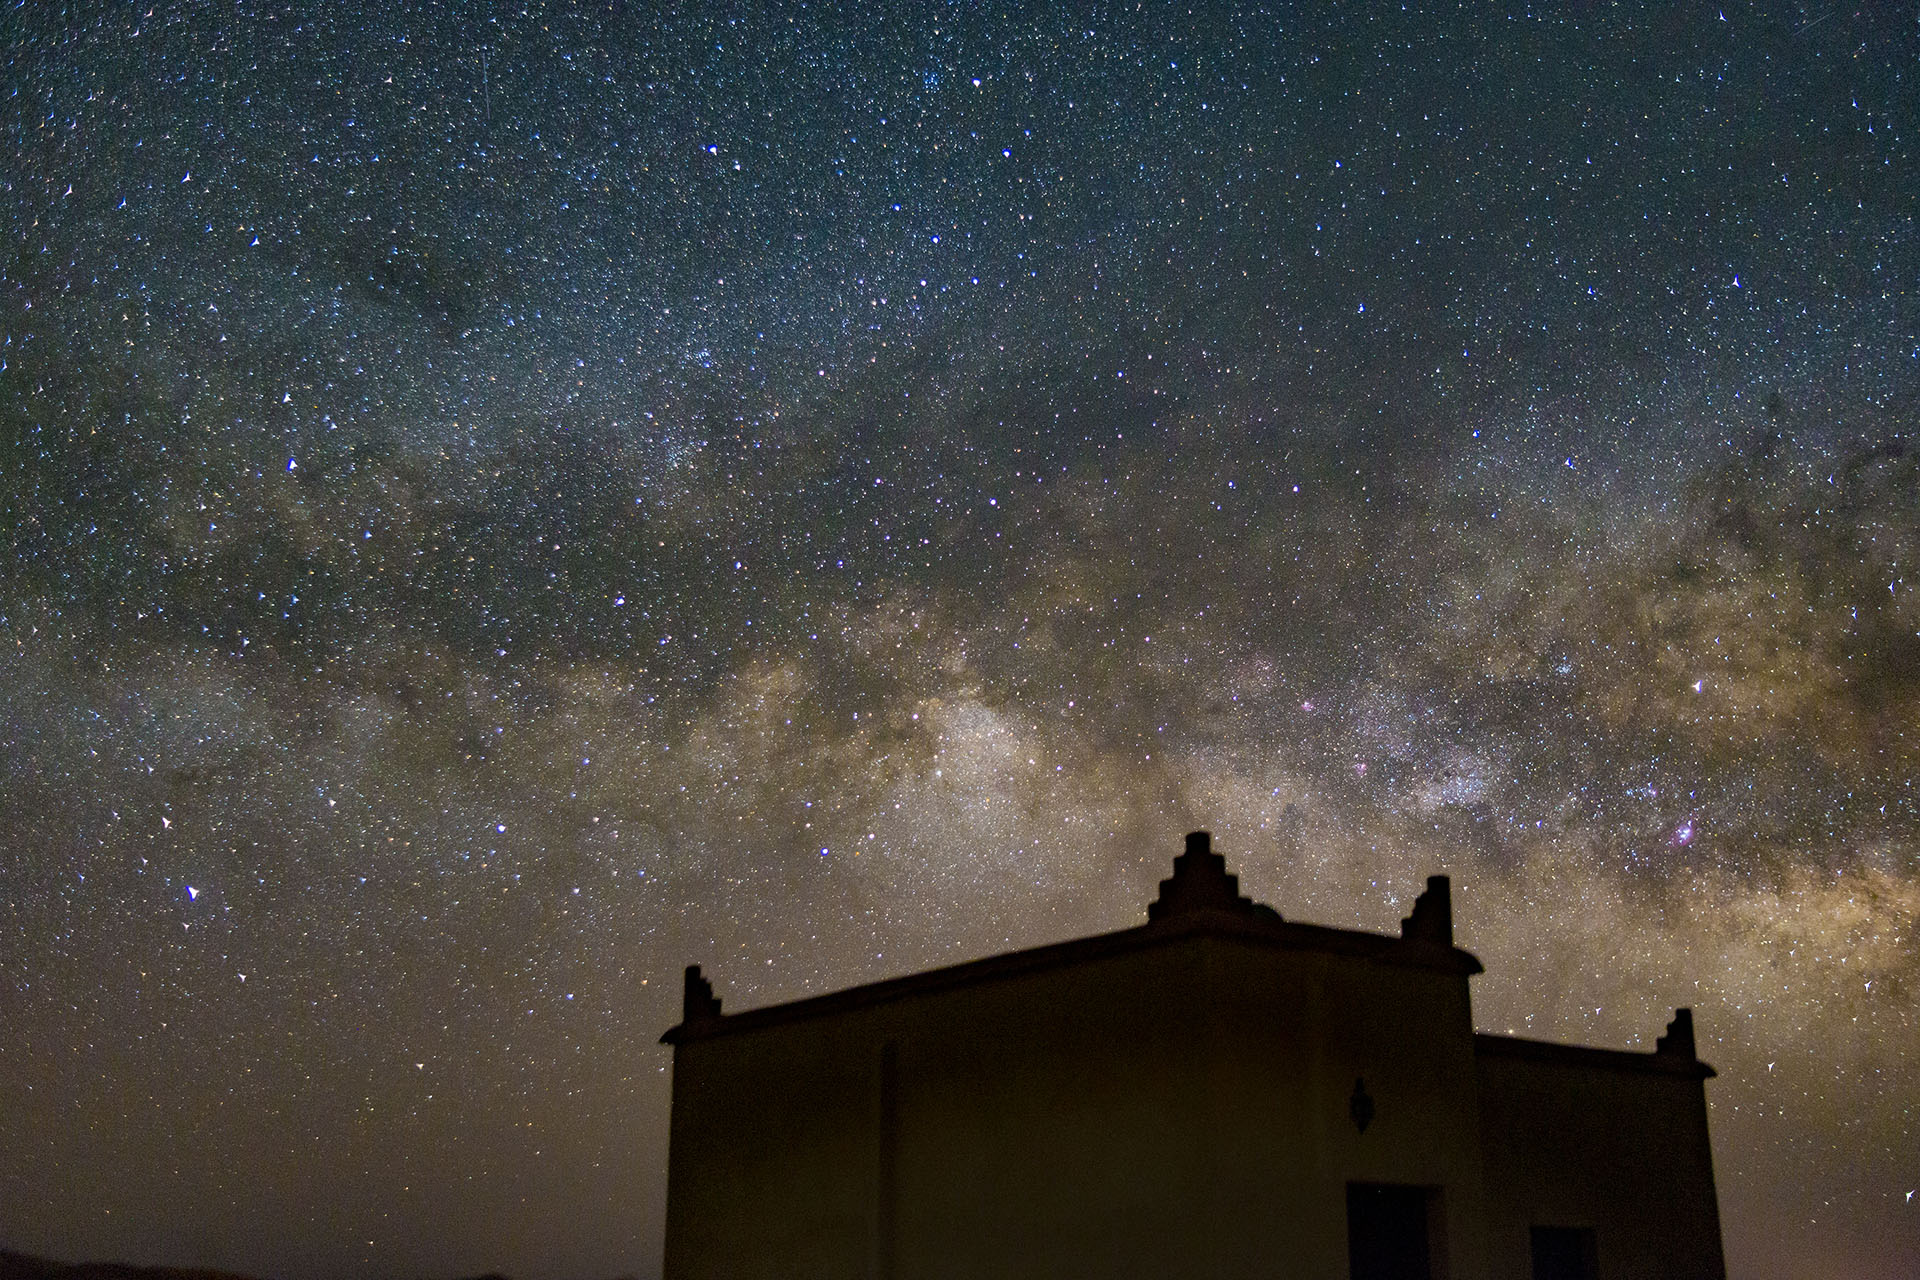 Milky way over Riad Dar Hassan Rooms - photo by Ezyê Moleda all rights reserved